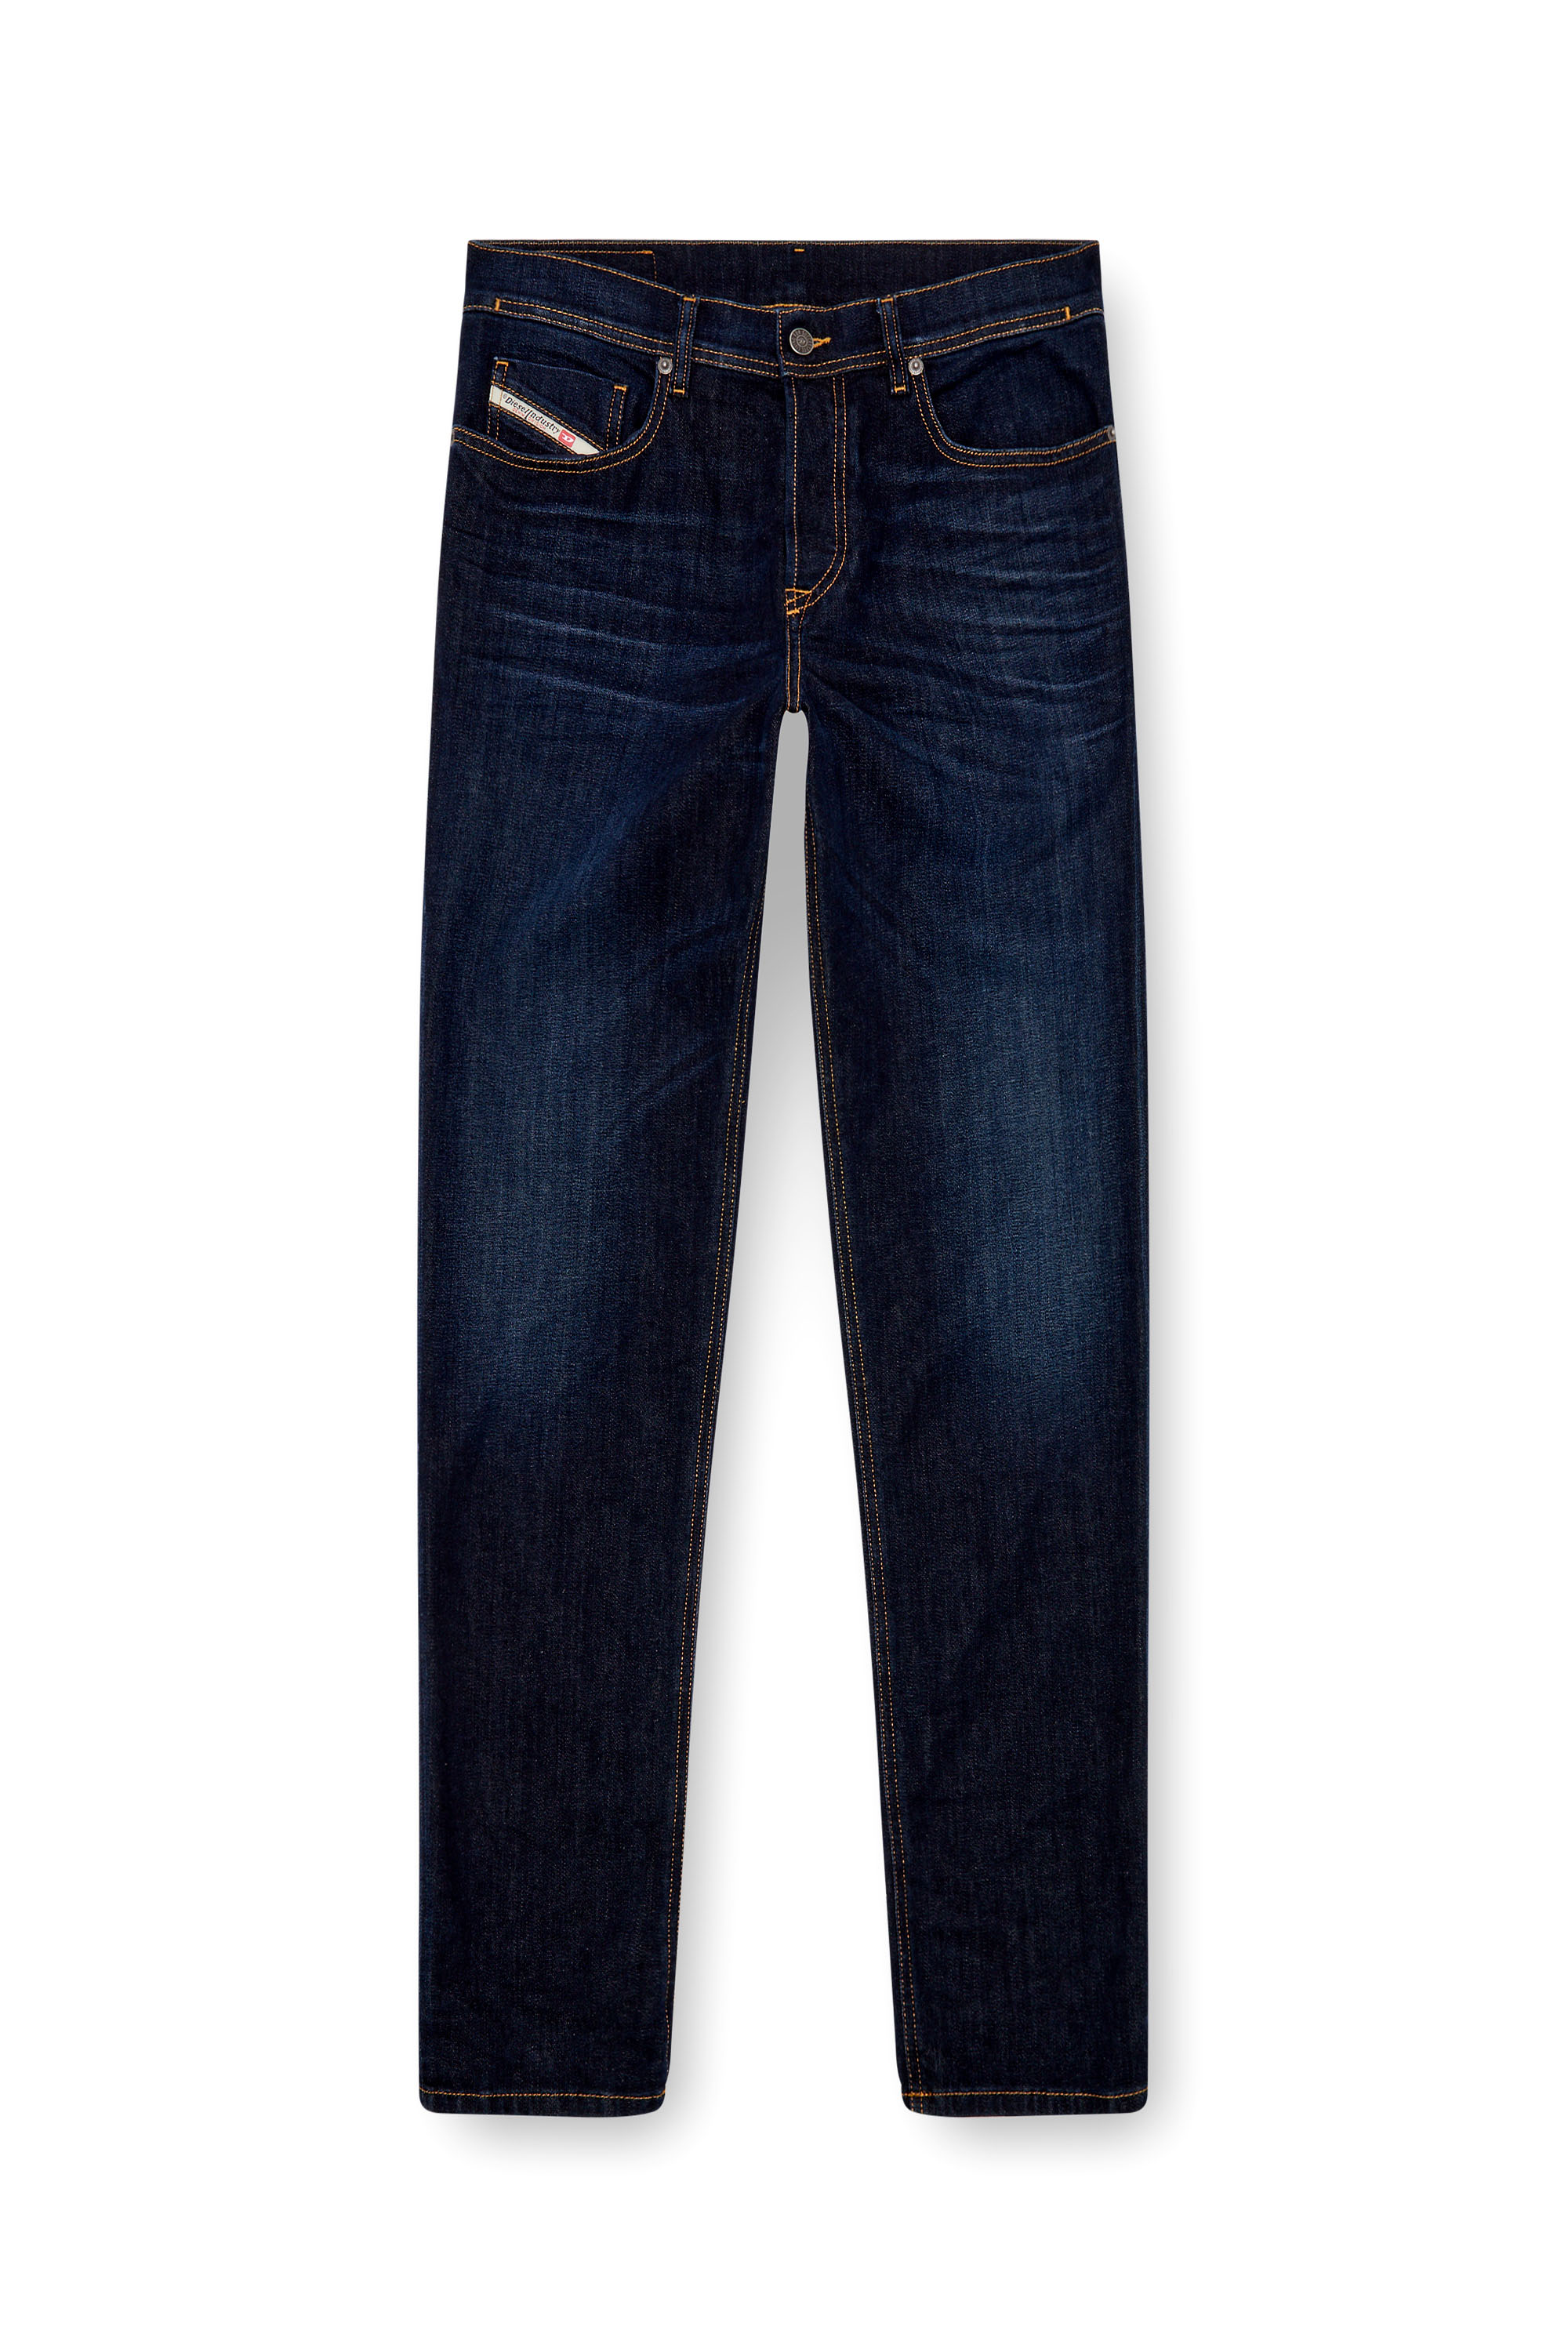 Diesel - Tapered Jeans 2023 D-Finitive 009ZS, Hombre Tapered Jeans - 2023 D-Finitive in Azul marino - Image 3